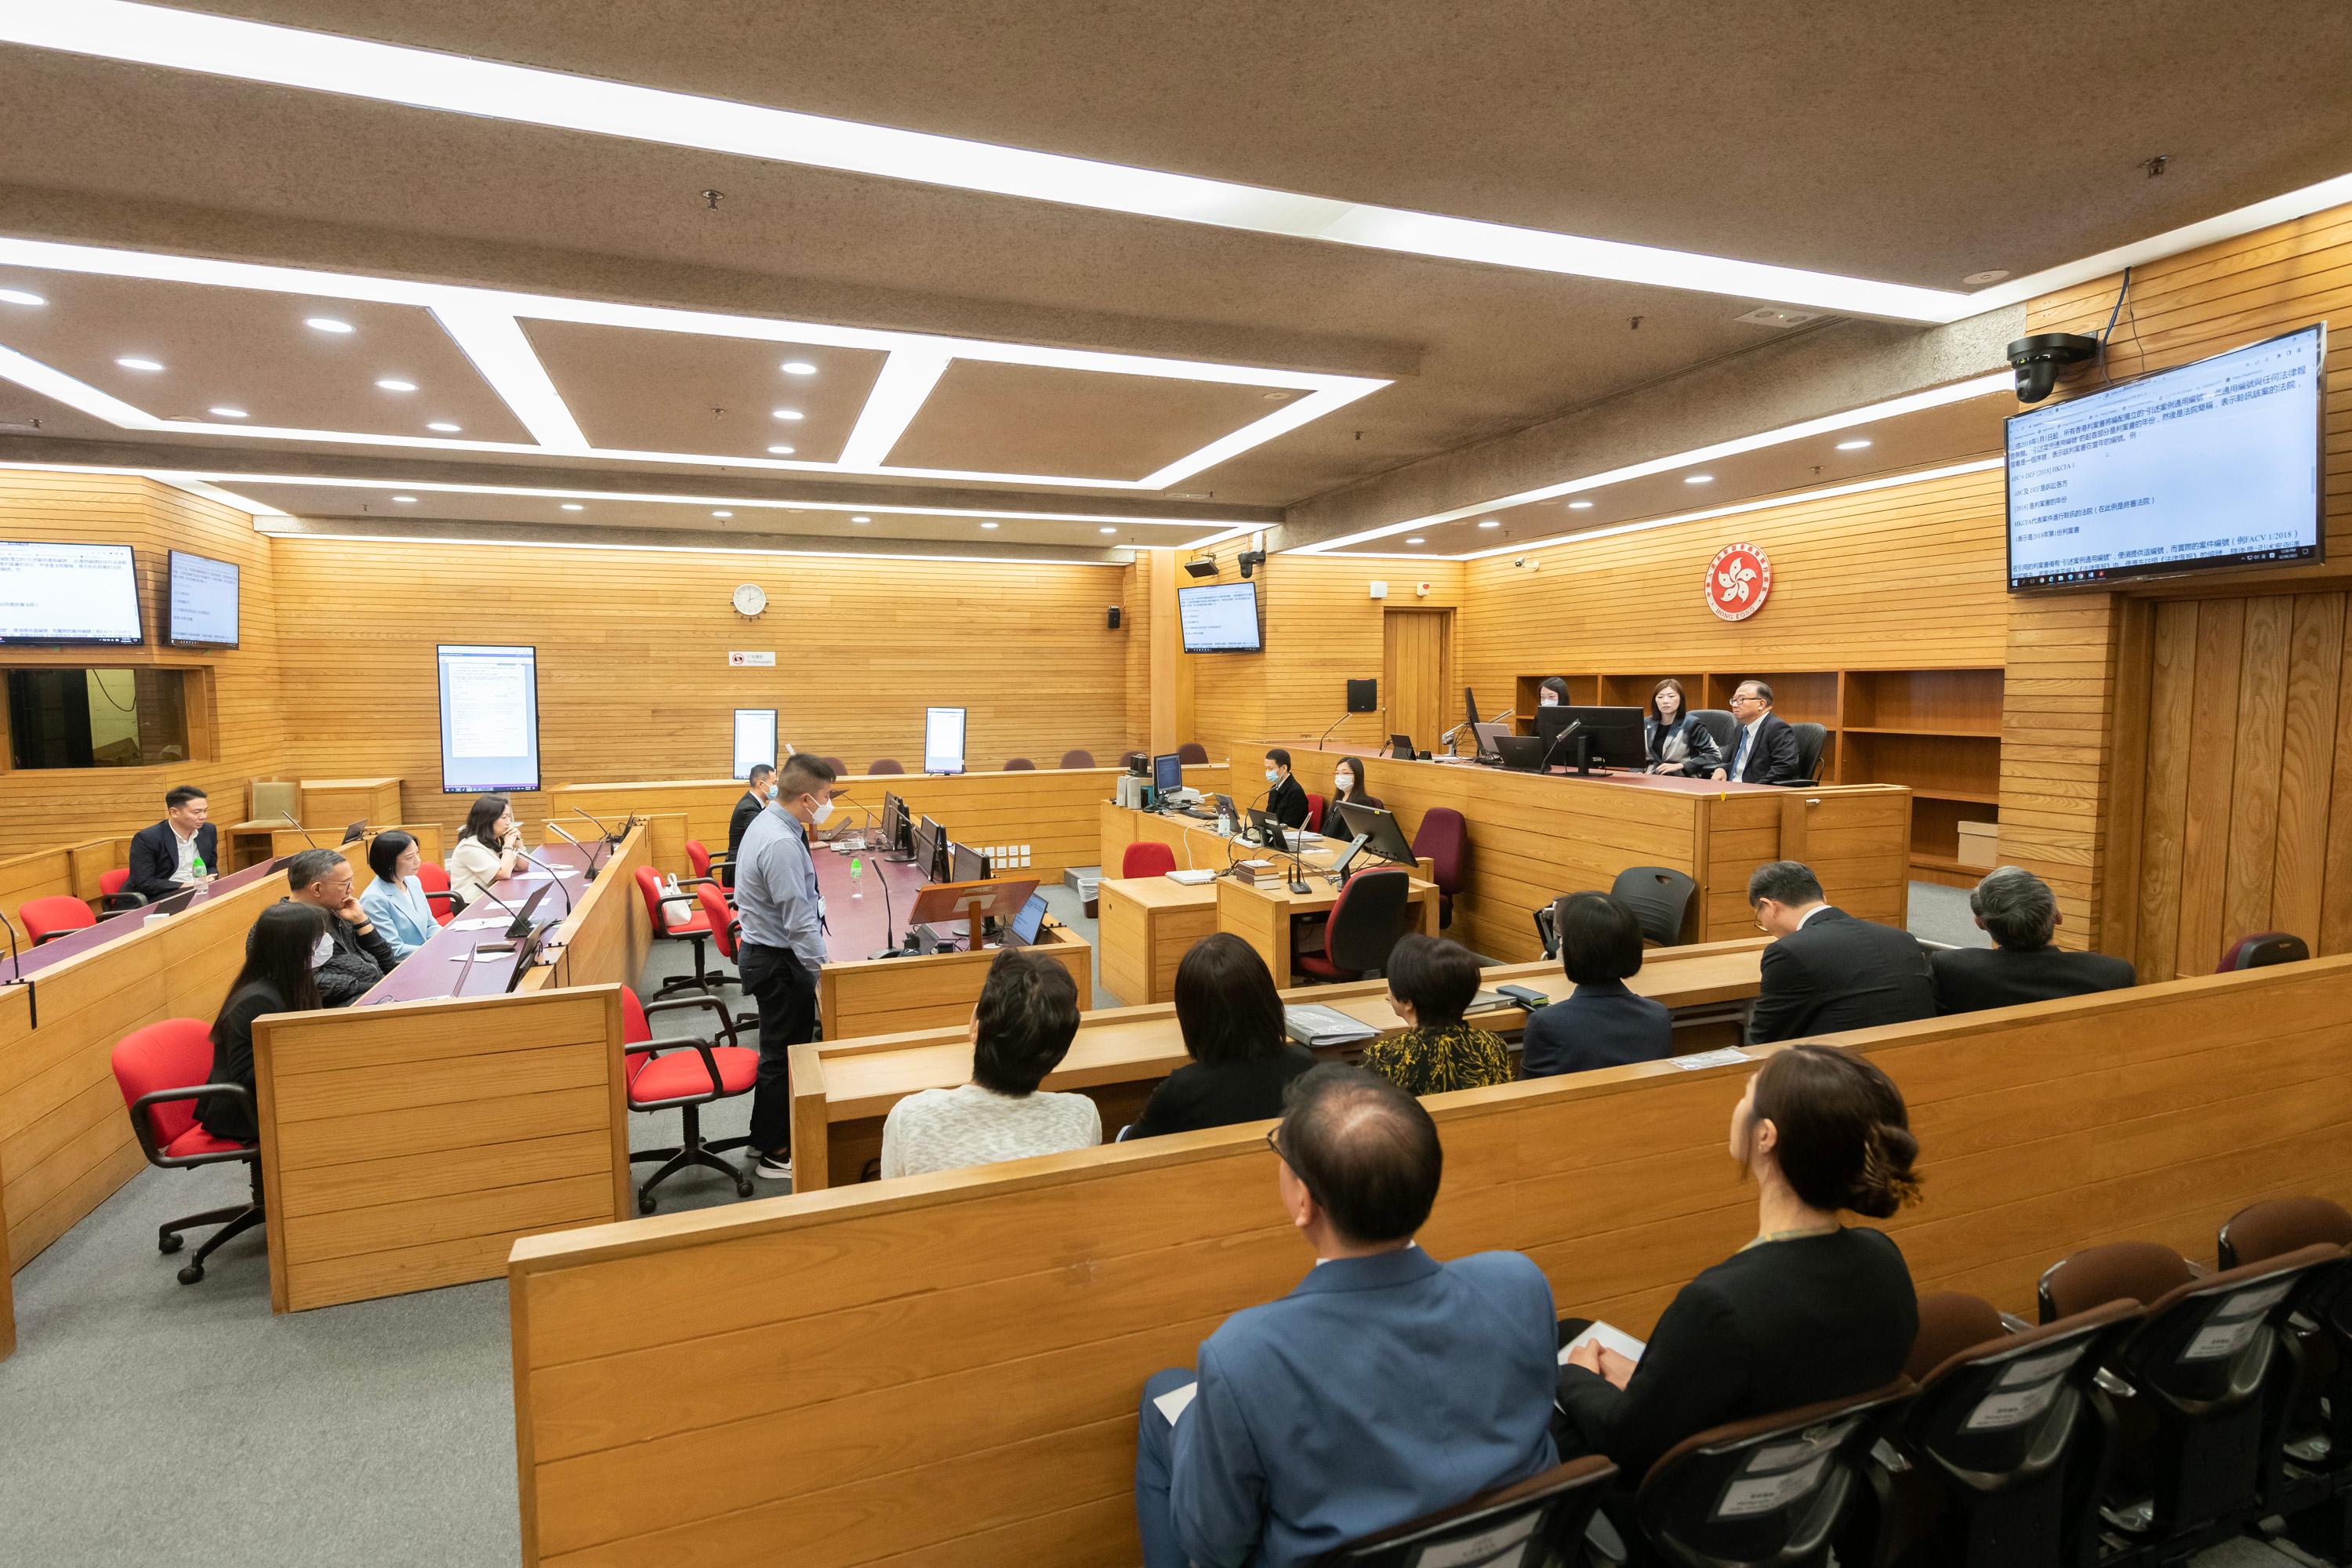 The Legislative Council (LegCo) Panel on Administration of Justice and Legal Services visits the Judiciary at the High Court Building today (June 2) to meet with members of the Judiciary and toured its facilities. Photos shows LegCo Members observing the demonstration of remote hearing and digital evidence presentation.